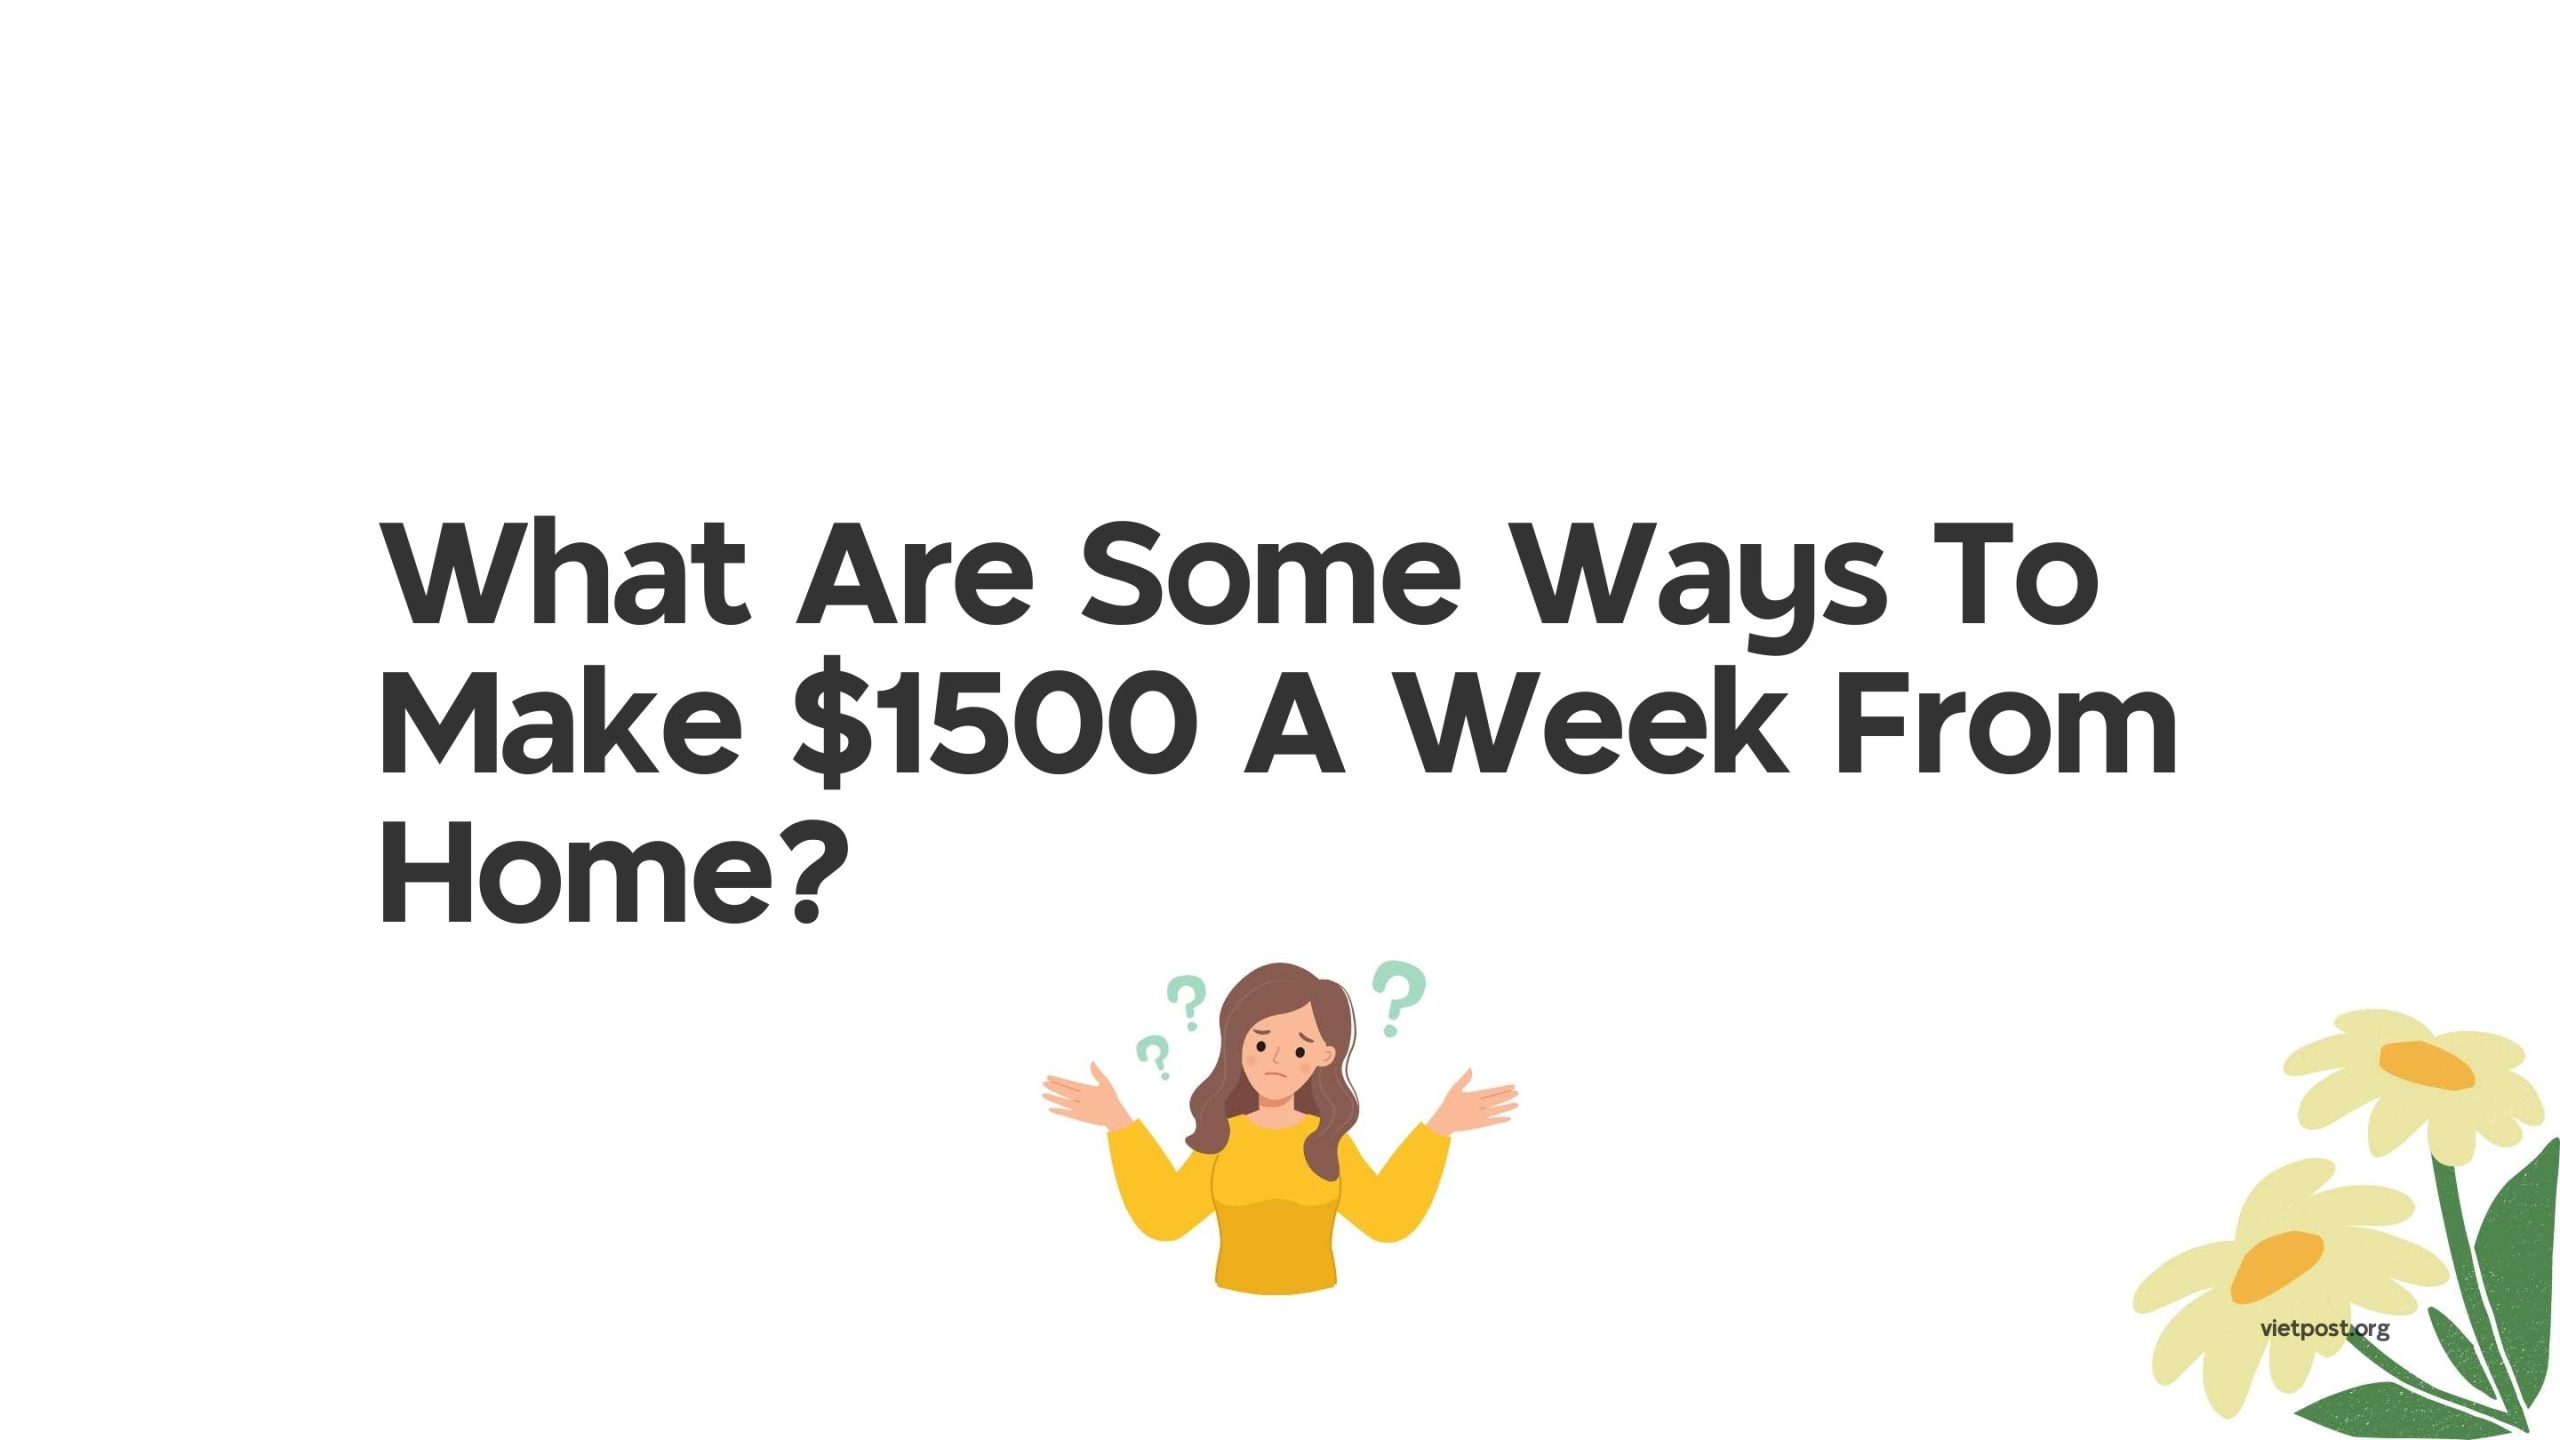 What Are Some Ways To Make $1500 A Week From Home?